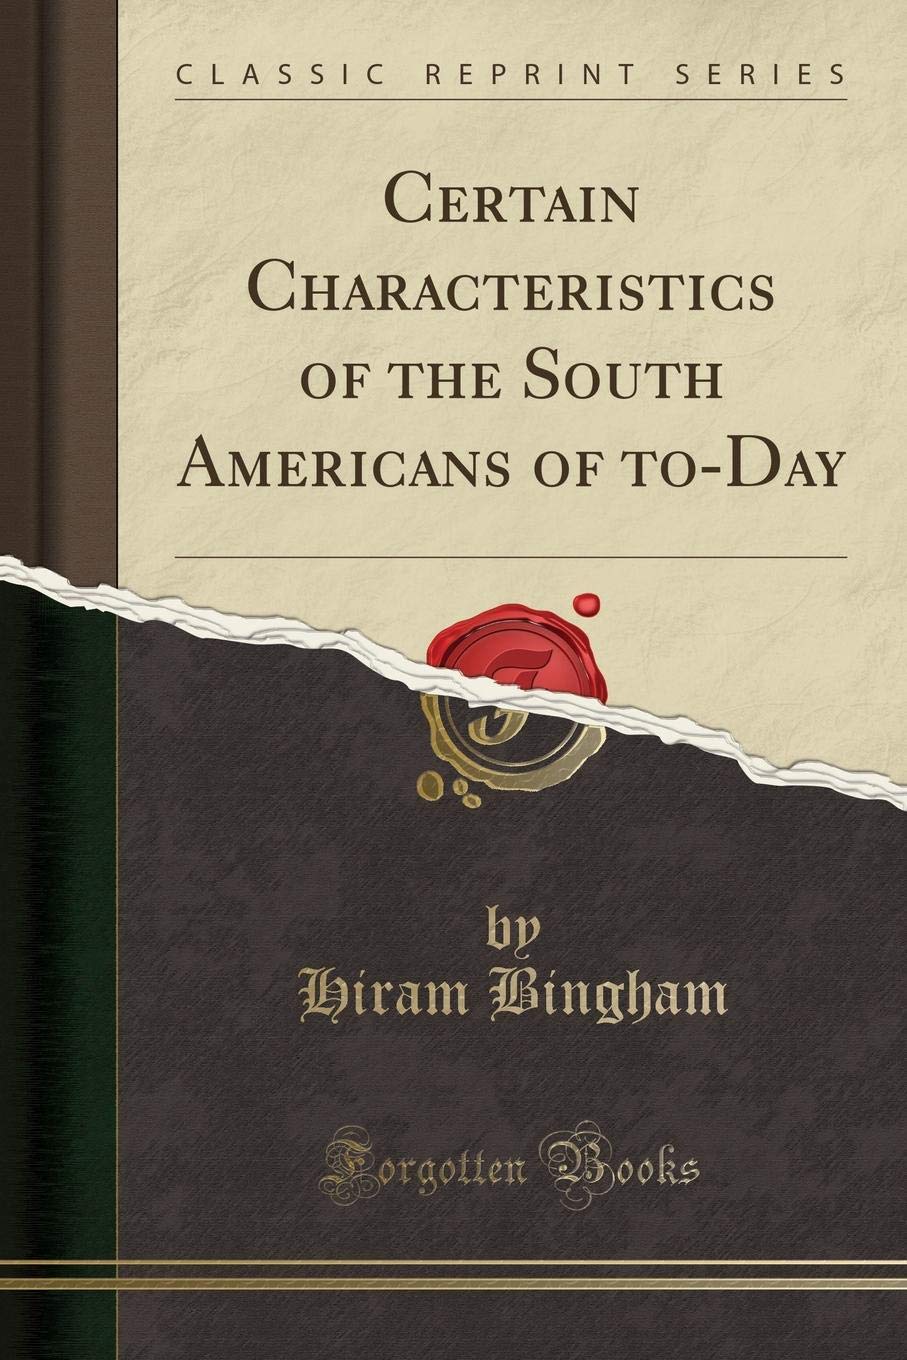 Certain Characteristics of the South Americans of to-Day